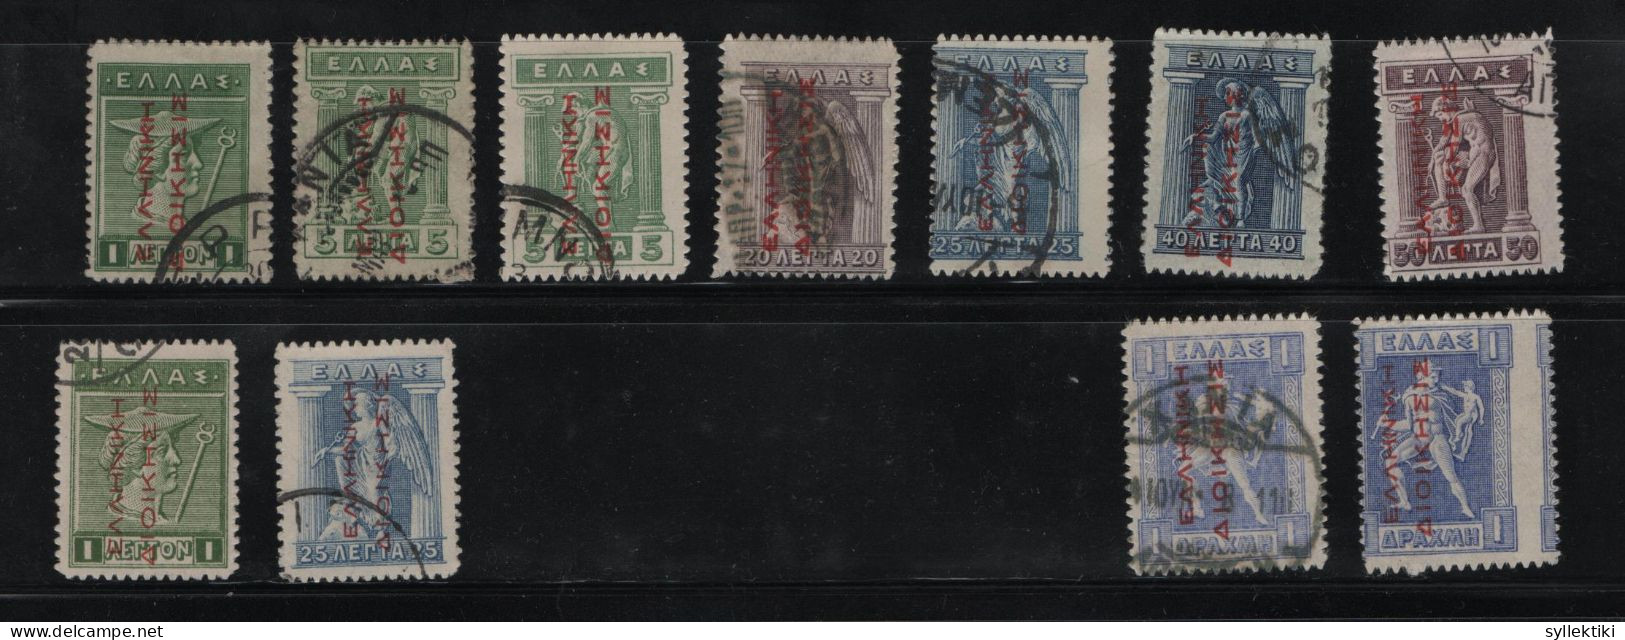 GREECE 1913 GREEK ADMIN READING UP RED & CARMIN 1 LEPTON - 1 DRACHMA 11 USED STAMPS  HELLAS No 271 - 278, 290, 295 AND V - Gebraucht